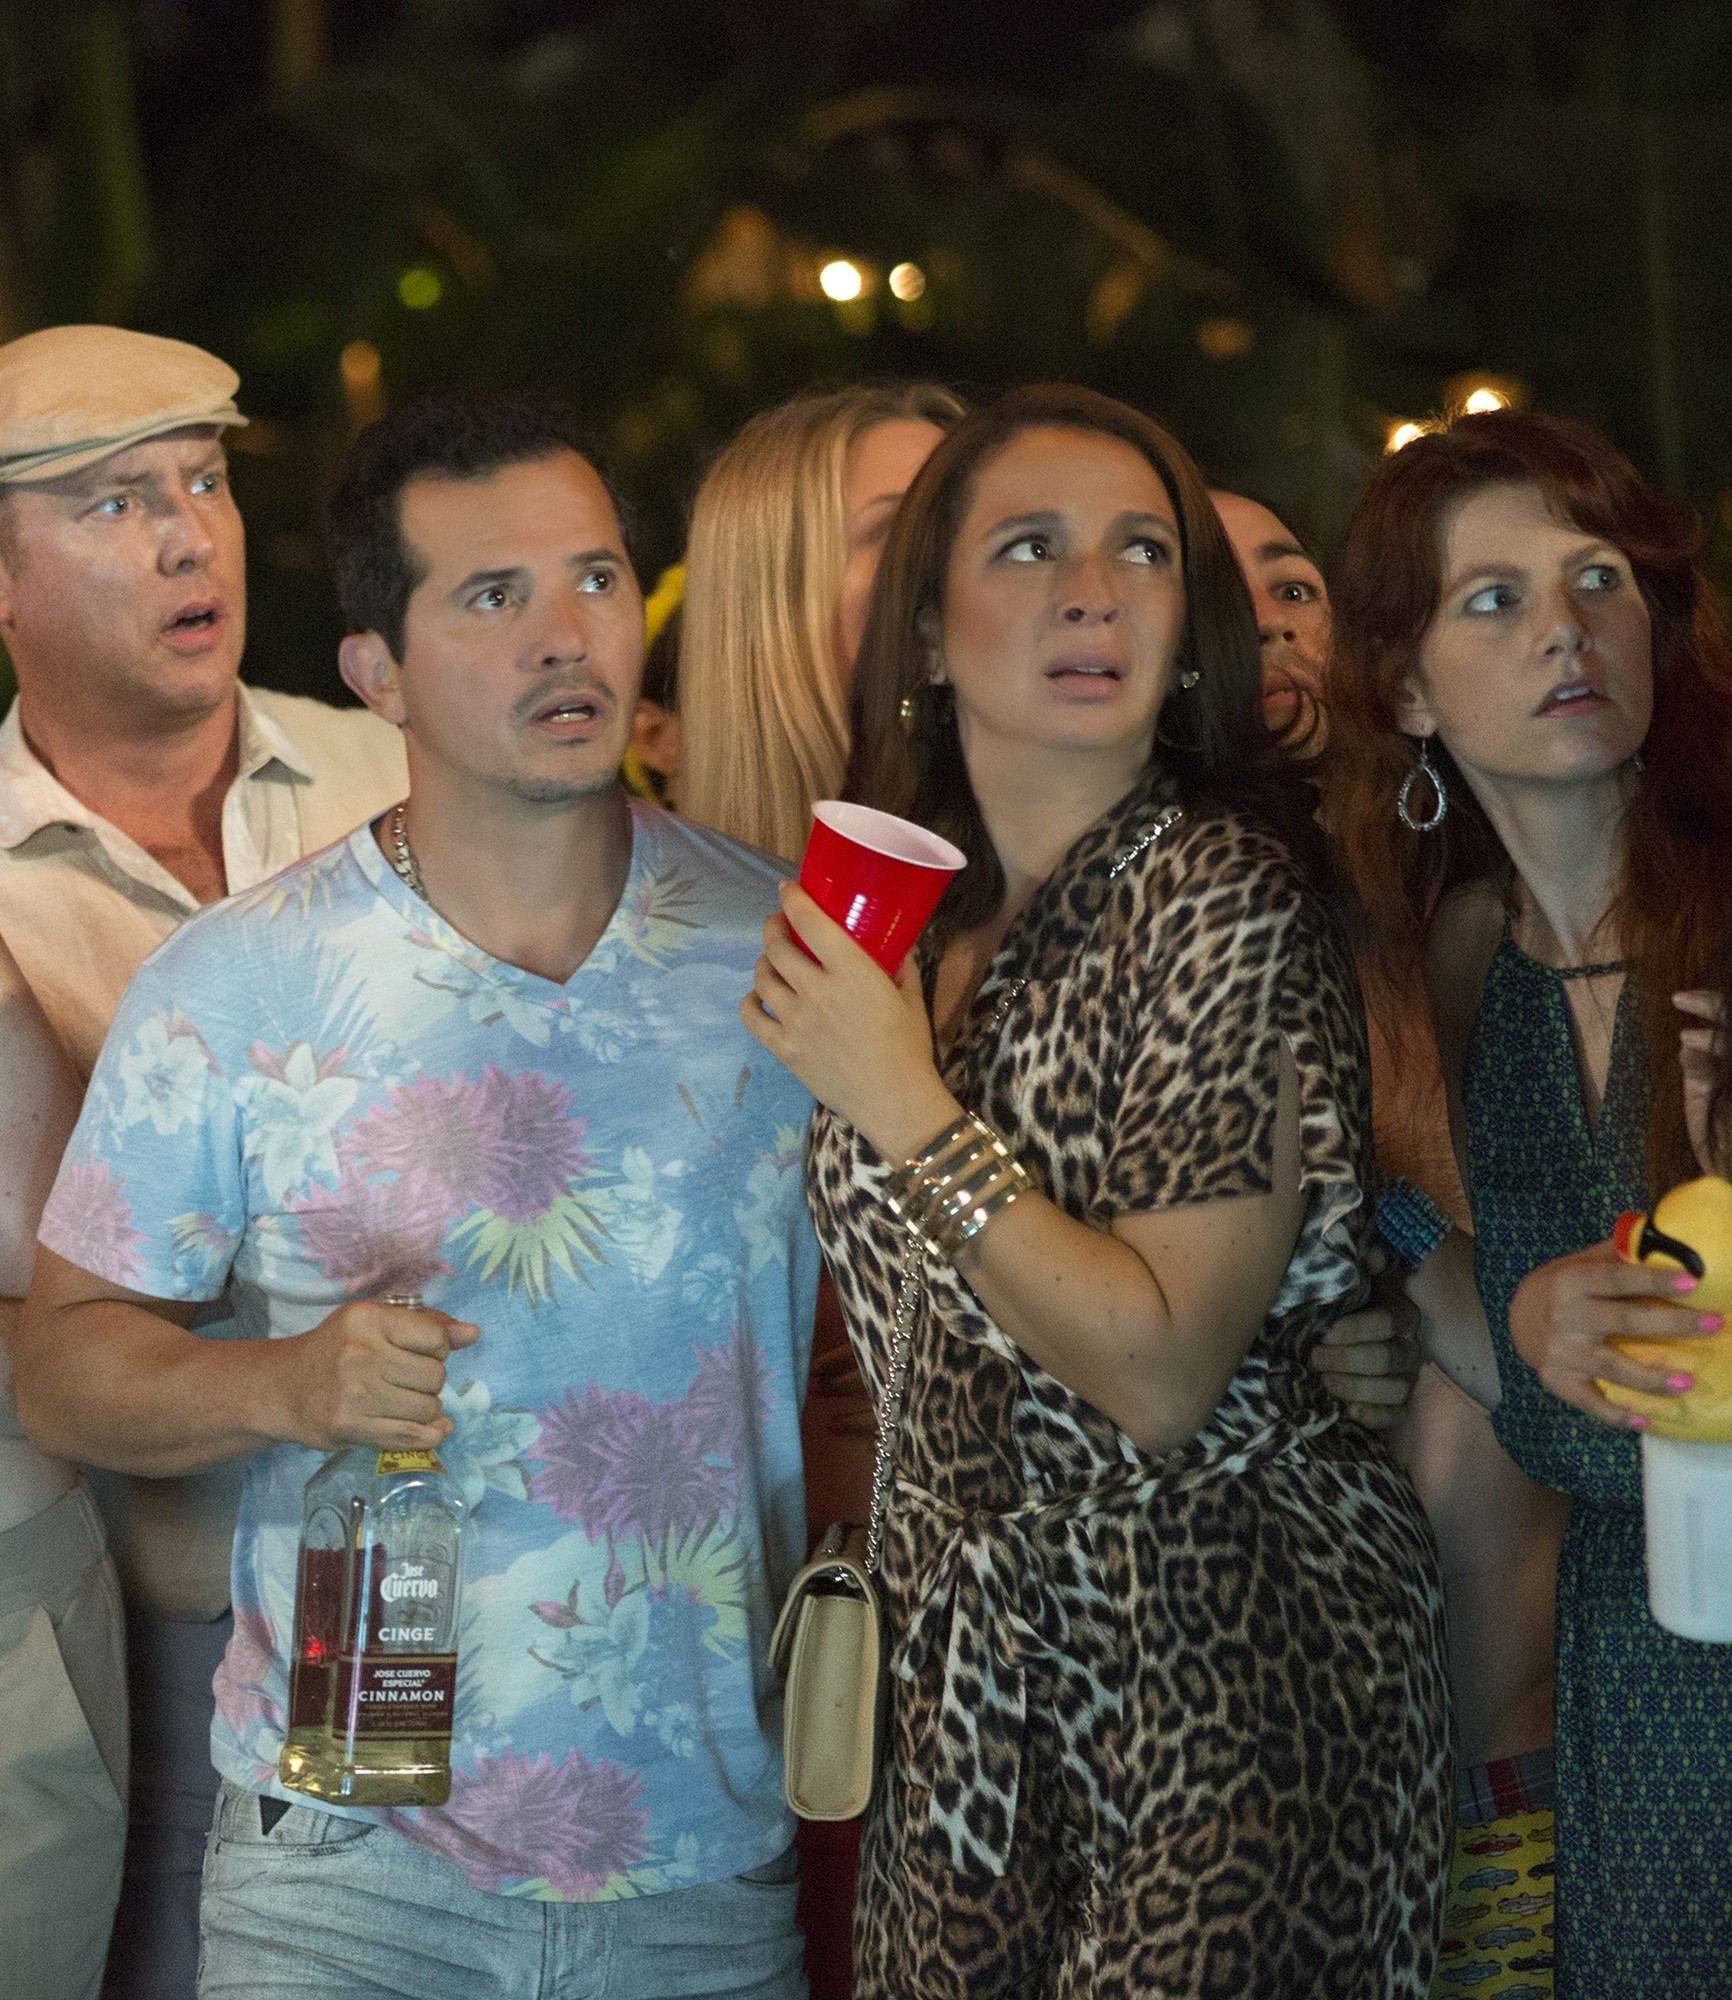 John Leguizamo stars as Dave and Maya Rudolph stars as Brinda in Universal Pictures' Sisters (2015)